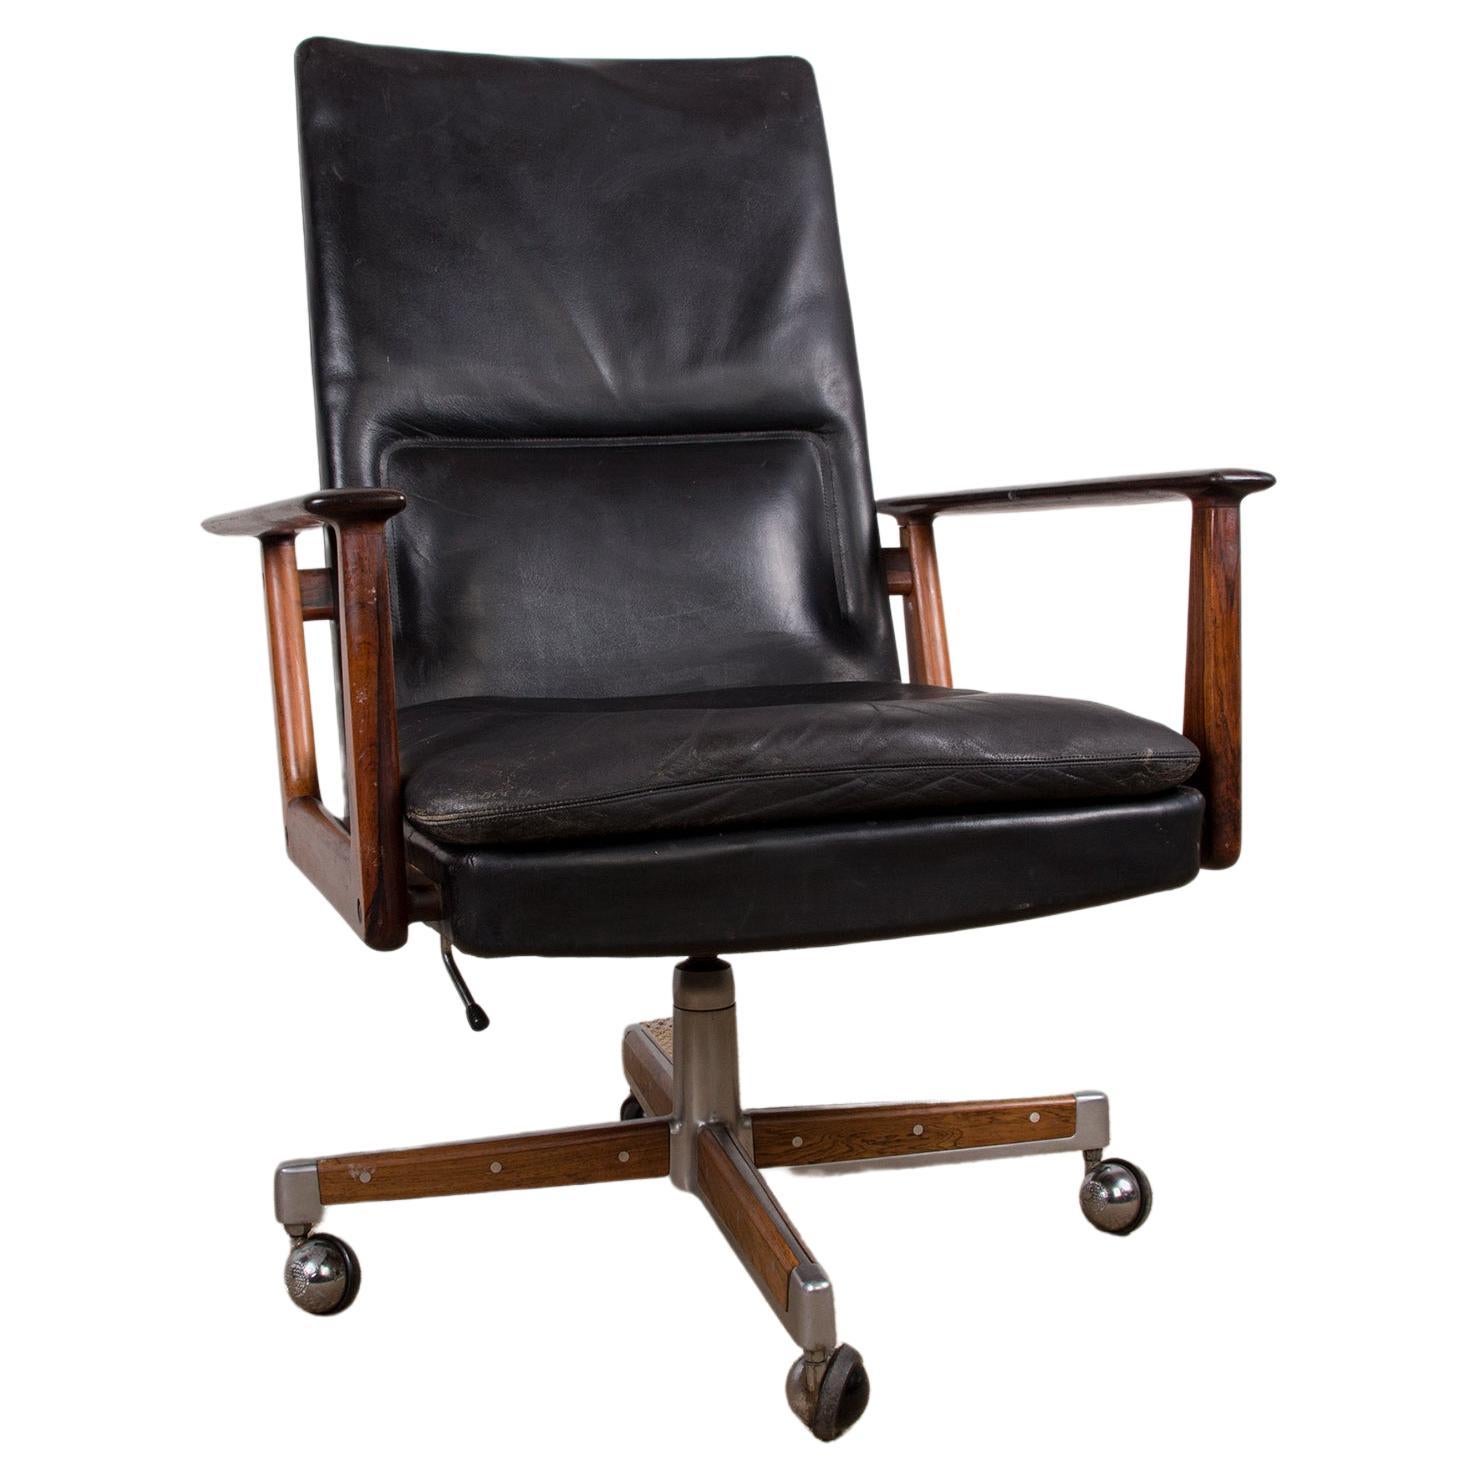 Large Danish Rosewood and Leather Office Armchair Model 419, Arne Vodder Sibast